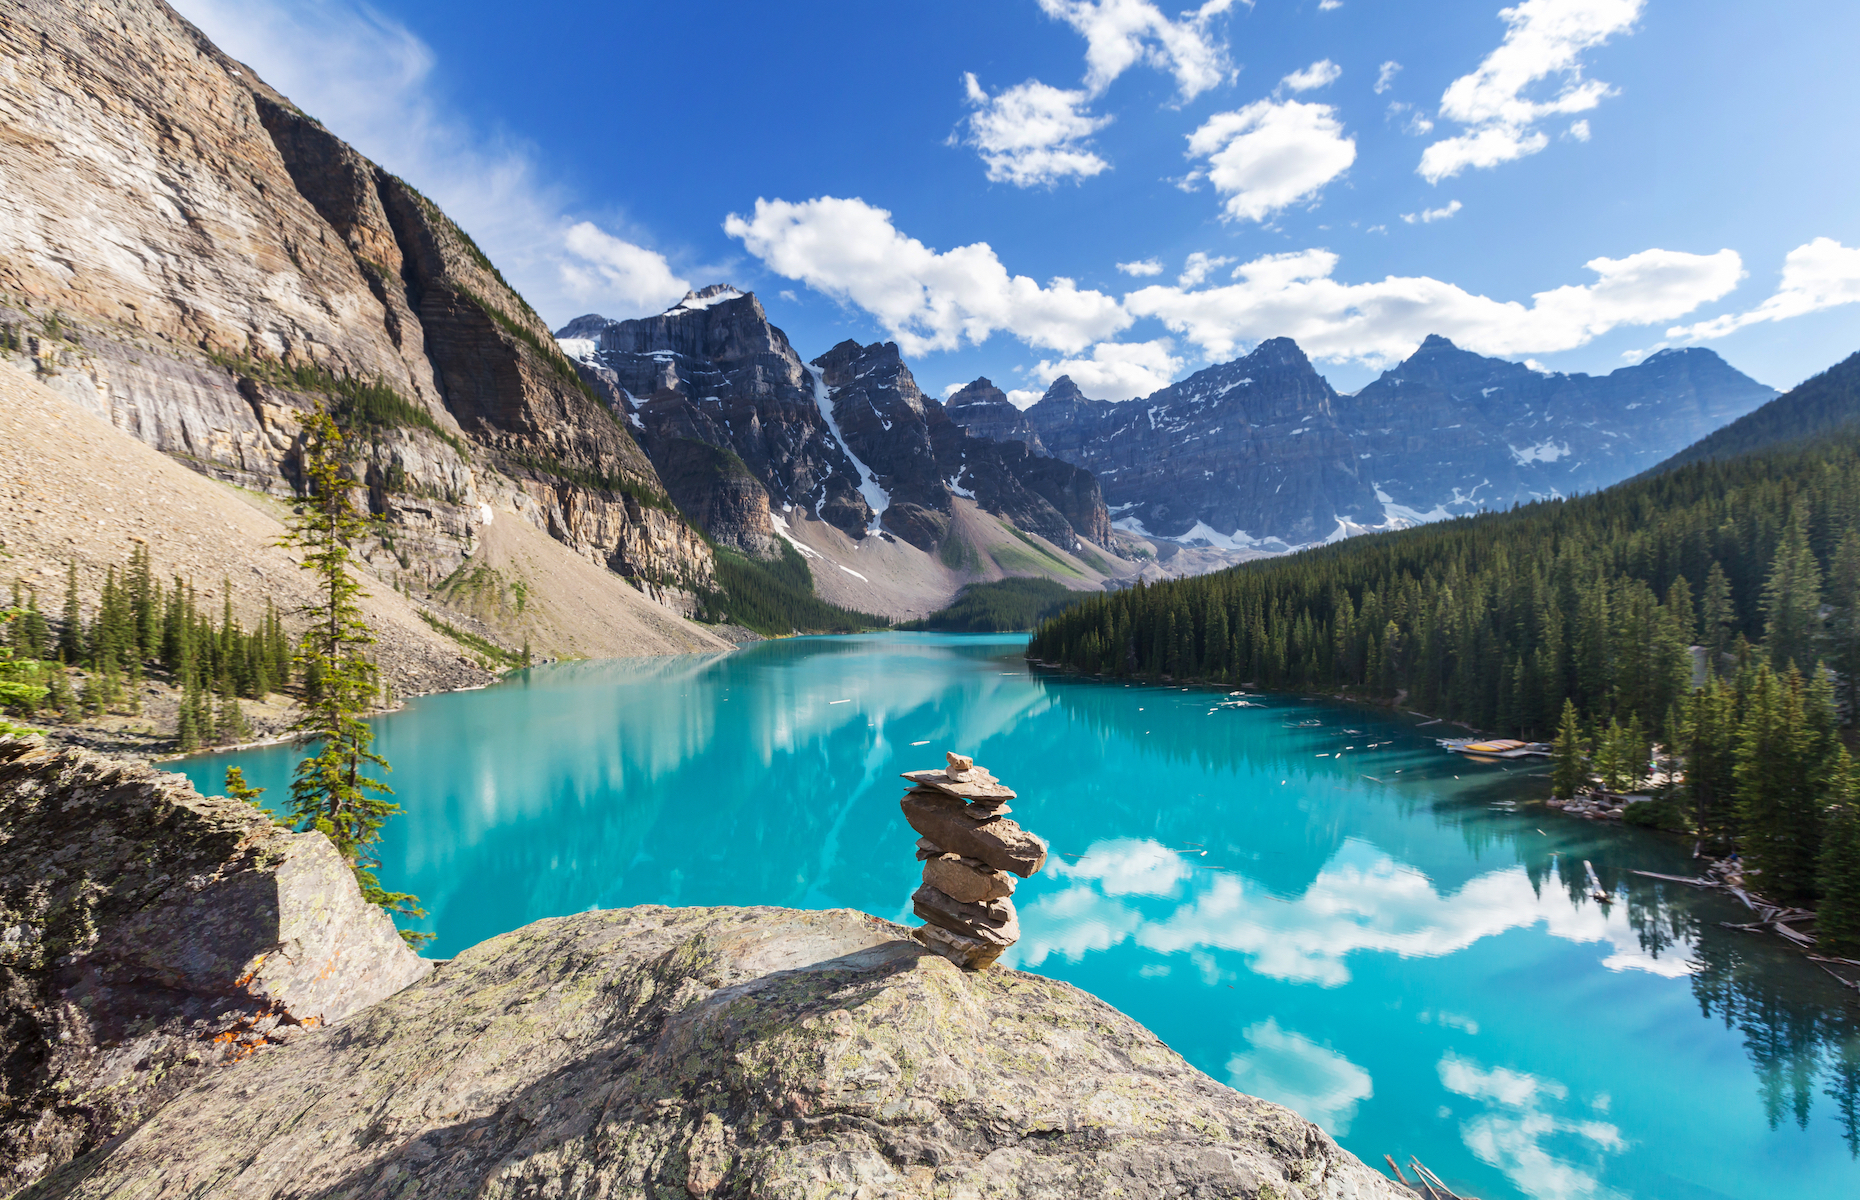 <p>Featuring stunning Rocky Mountain peaks and picture-perfect turquoise glacial lakes, <a href="https://www.pc.gc.ca/en/pn-np/ab/banff">Banff National Park</a> offers plenty of year-round activities from skiing and golf to cycling, climbing, and more. <a href="https://www.banfflakelouise.com/moraine-lake">Moraine Lake</a> (pictured) and <a href="https://www.banfflakelouise.com/lake-louise">Lake Louise</a> are two of the most photographed landmarks in the park.</p>